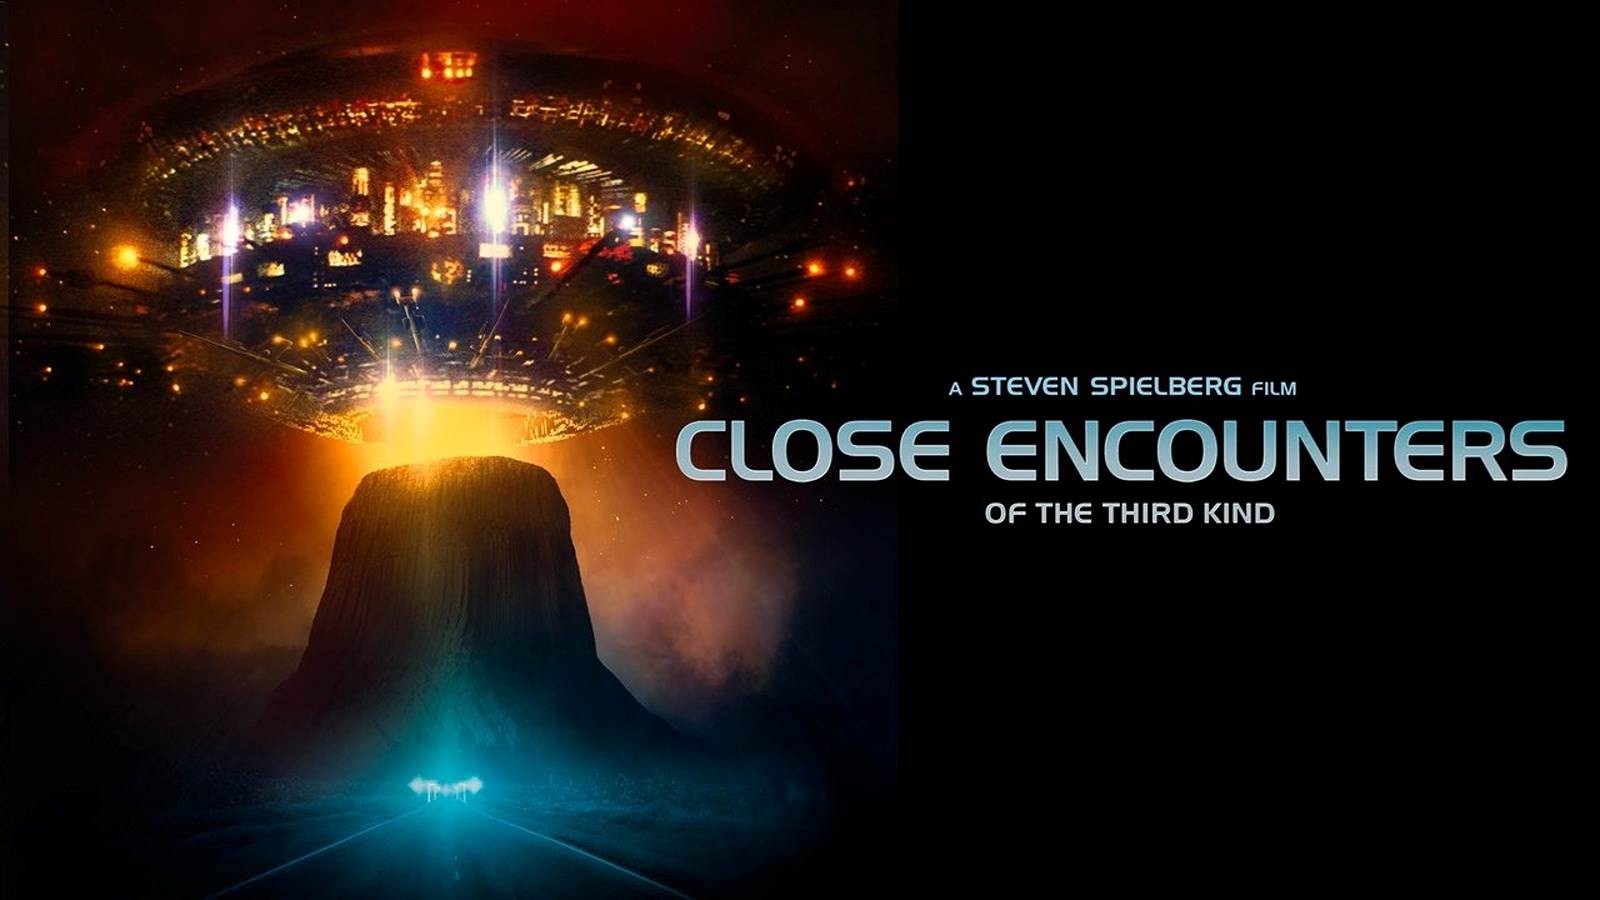 Steven Spielberg was forced to release Close Encounters earlier than he intended